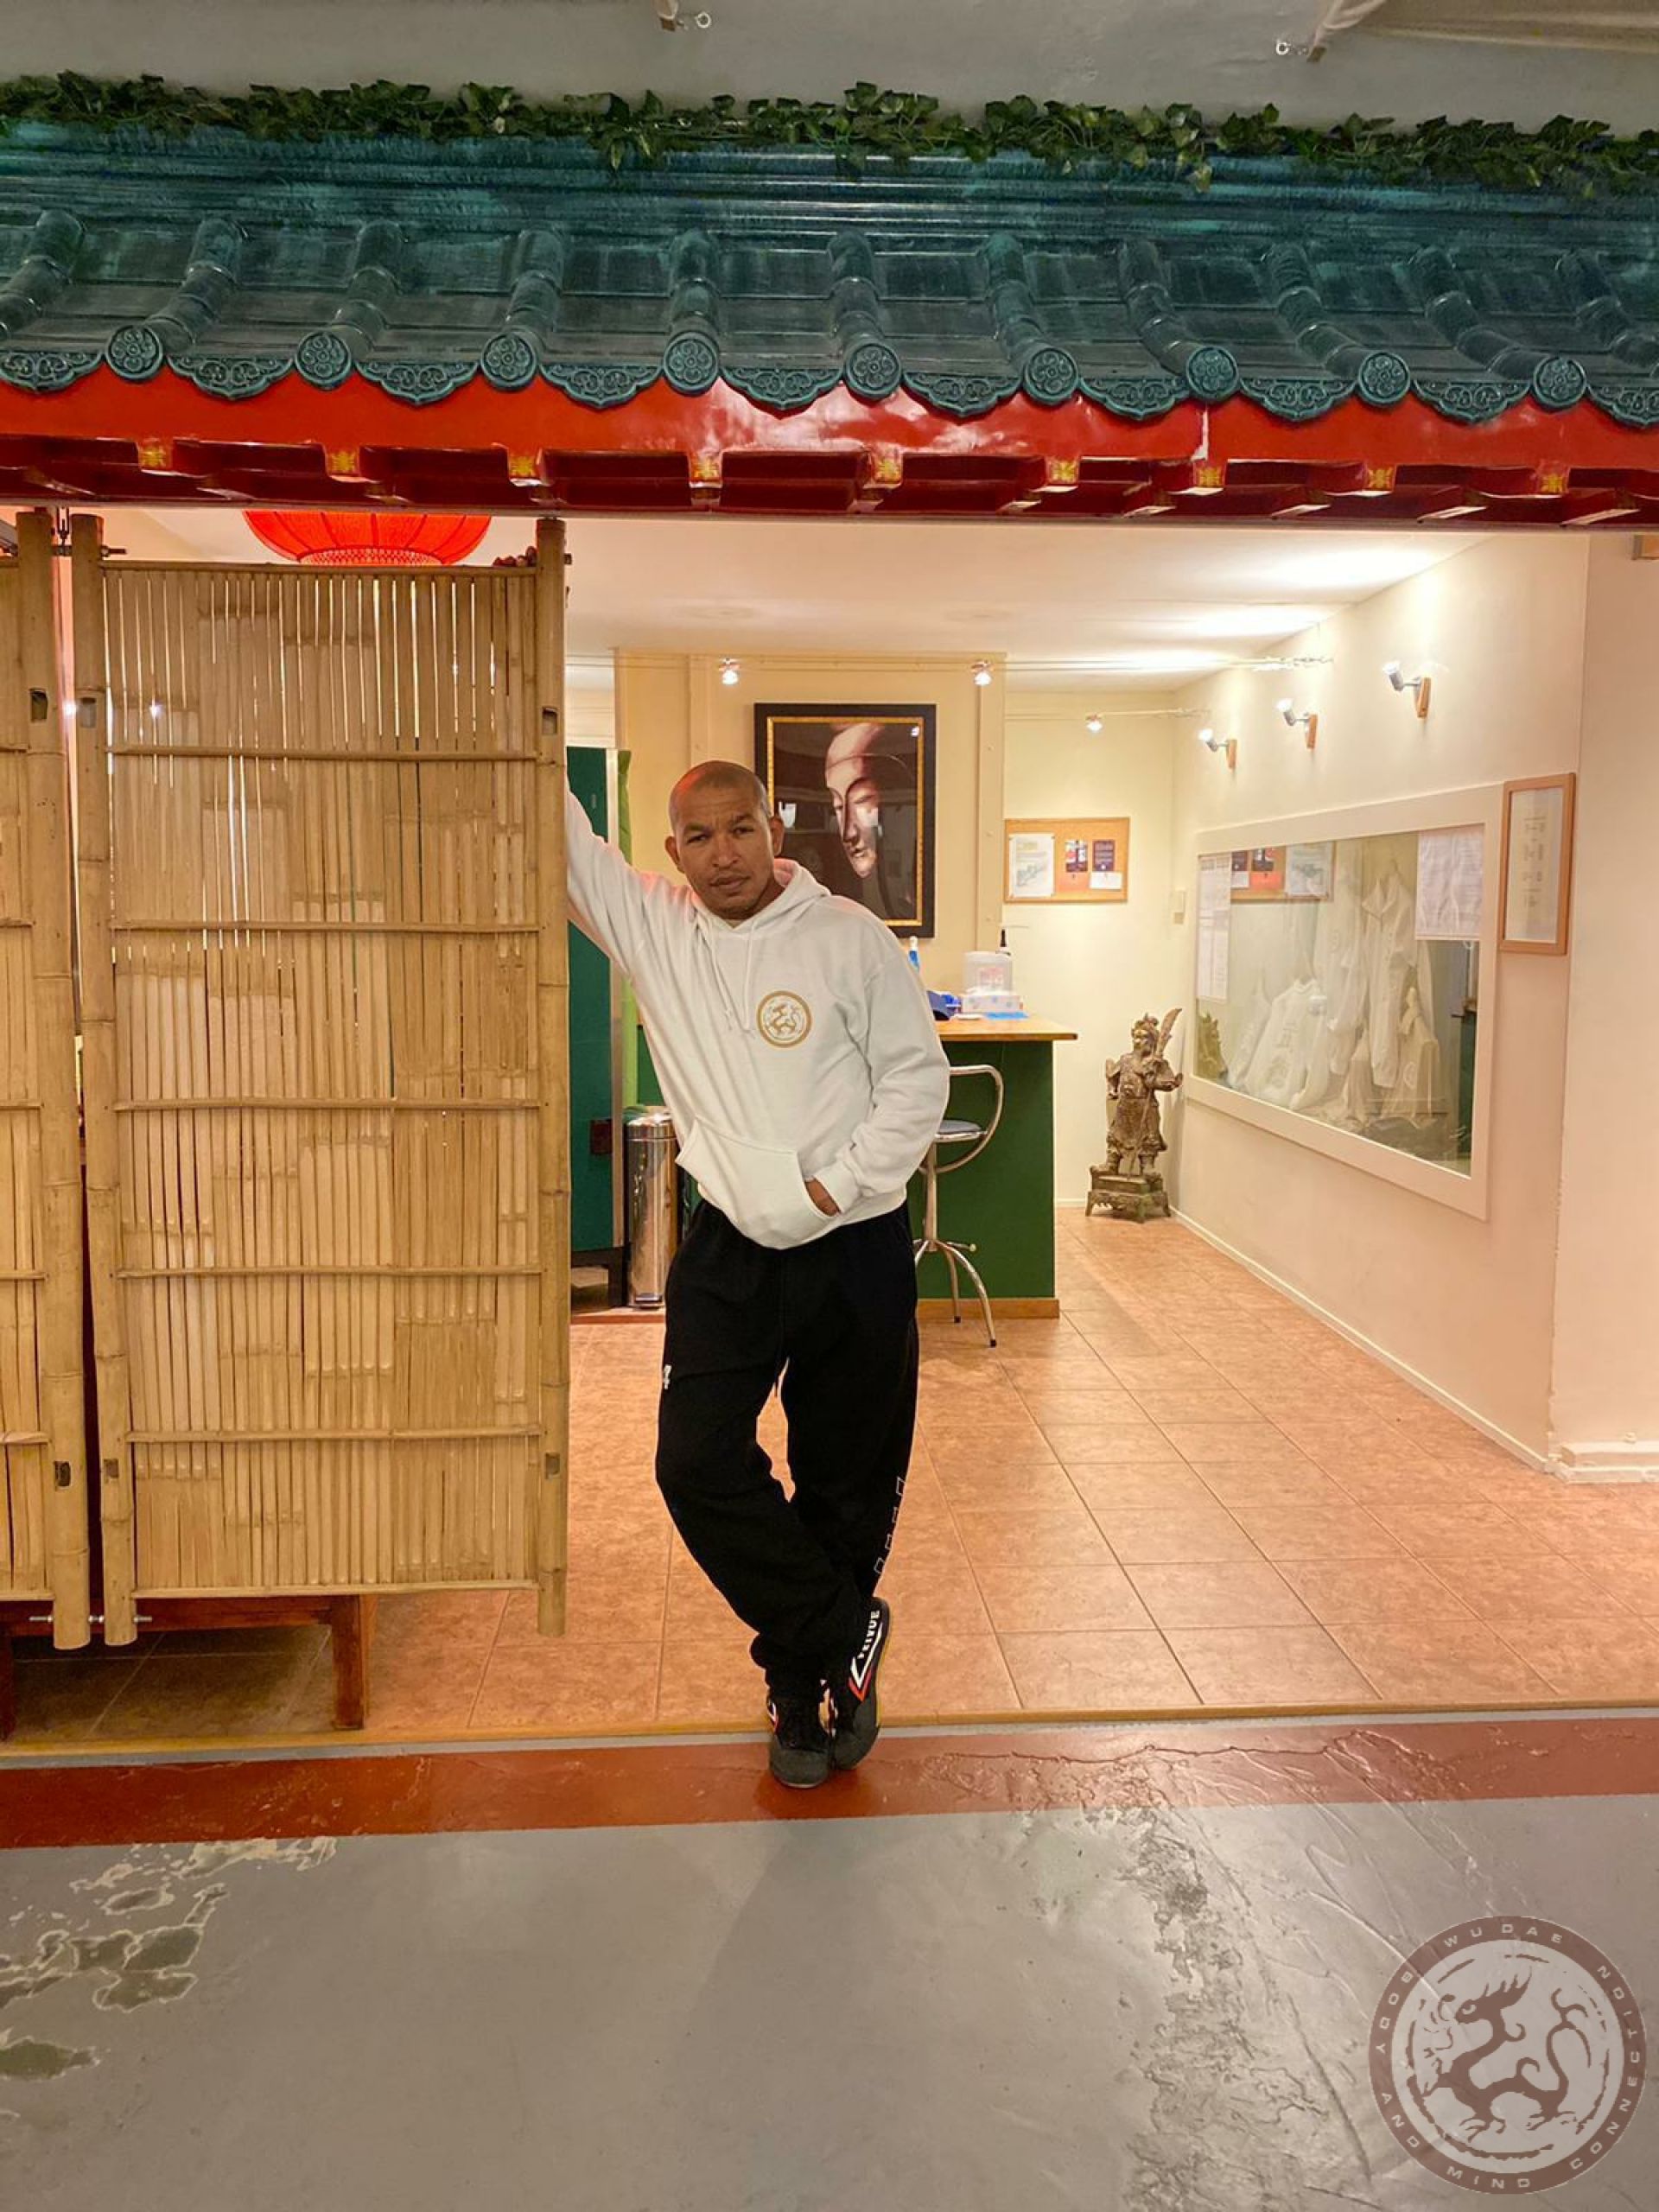 HUMANS OF WING CHUN: Cecil (1/3)